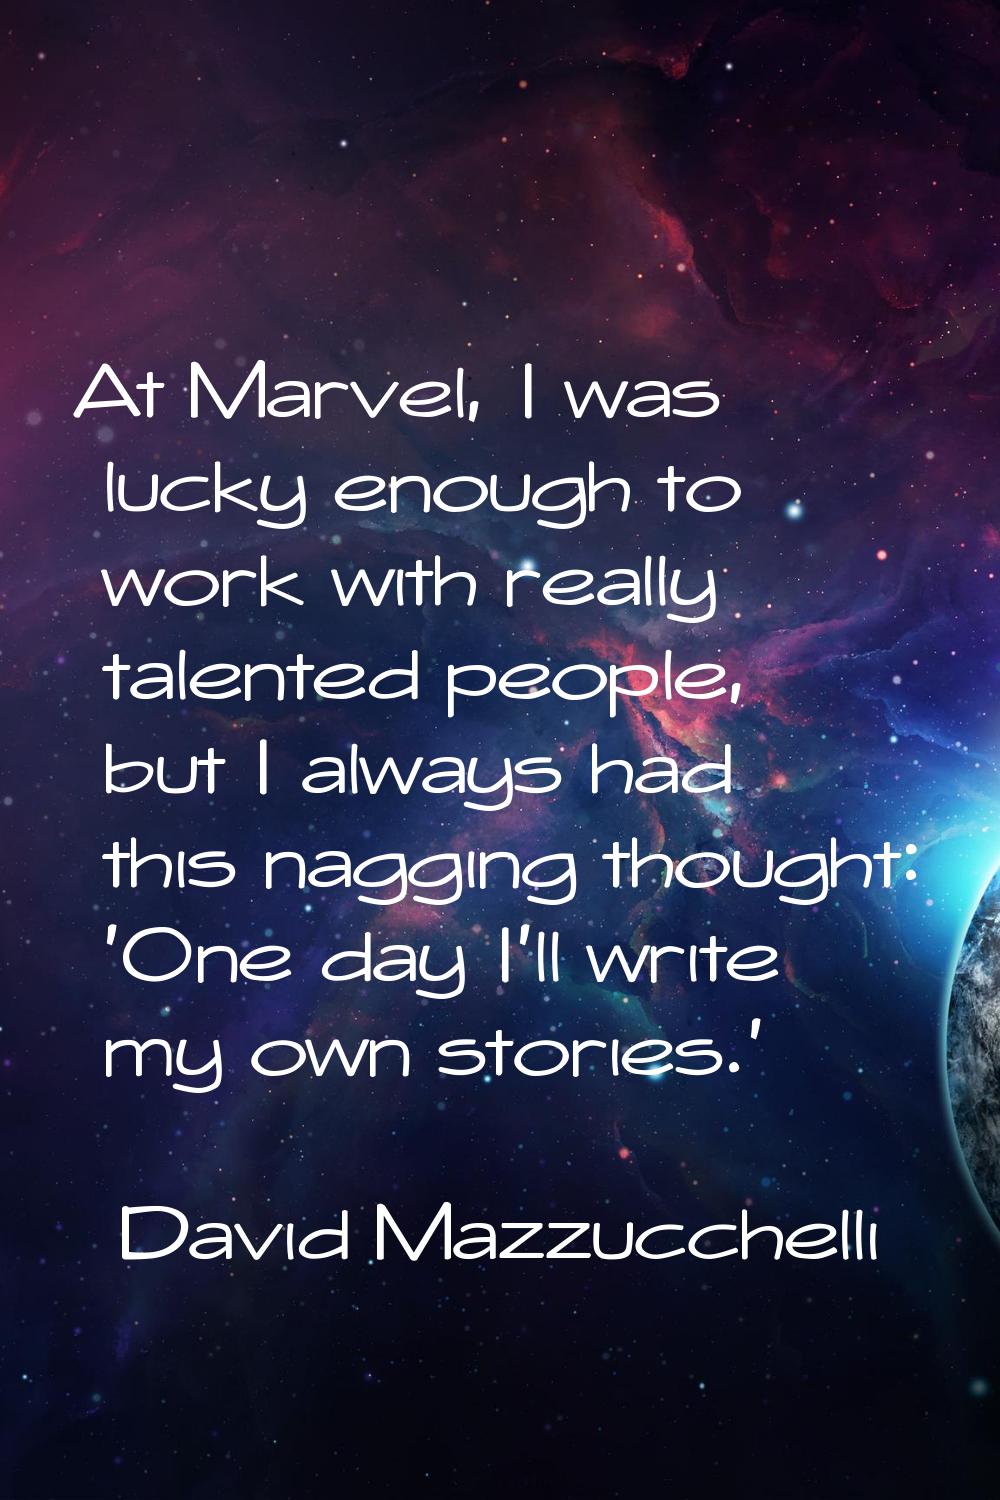 At Marvel, I was lucky enough to work with really talented people, but I always had this nagging th